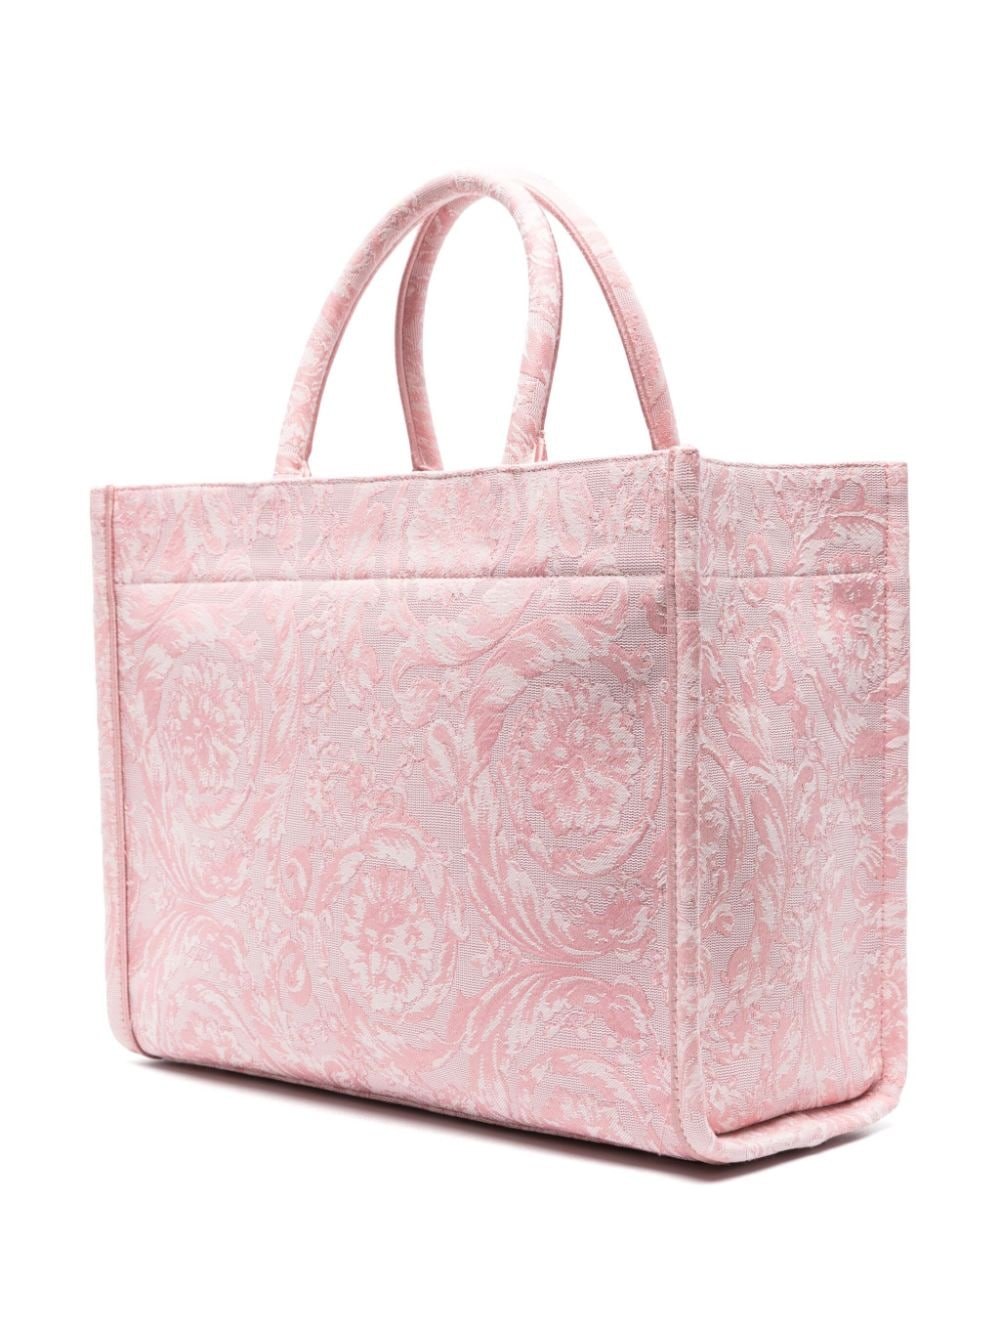 Athena Baroque-Print Tote Handbag for Women in Pale Pink